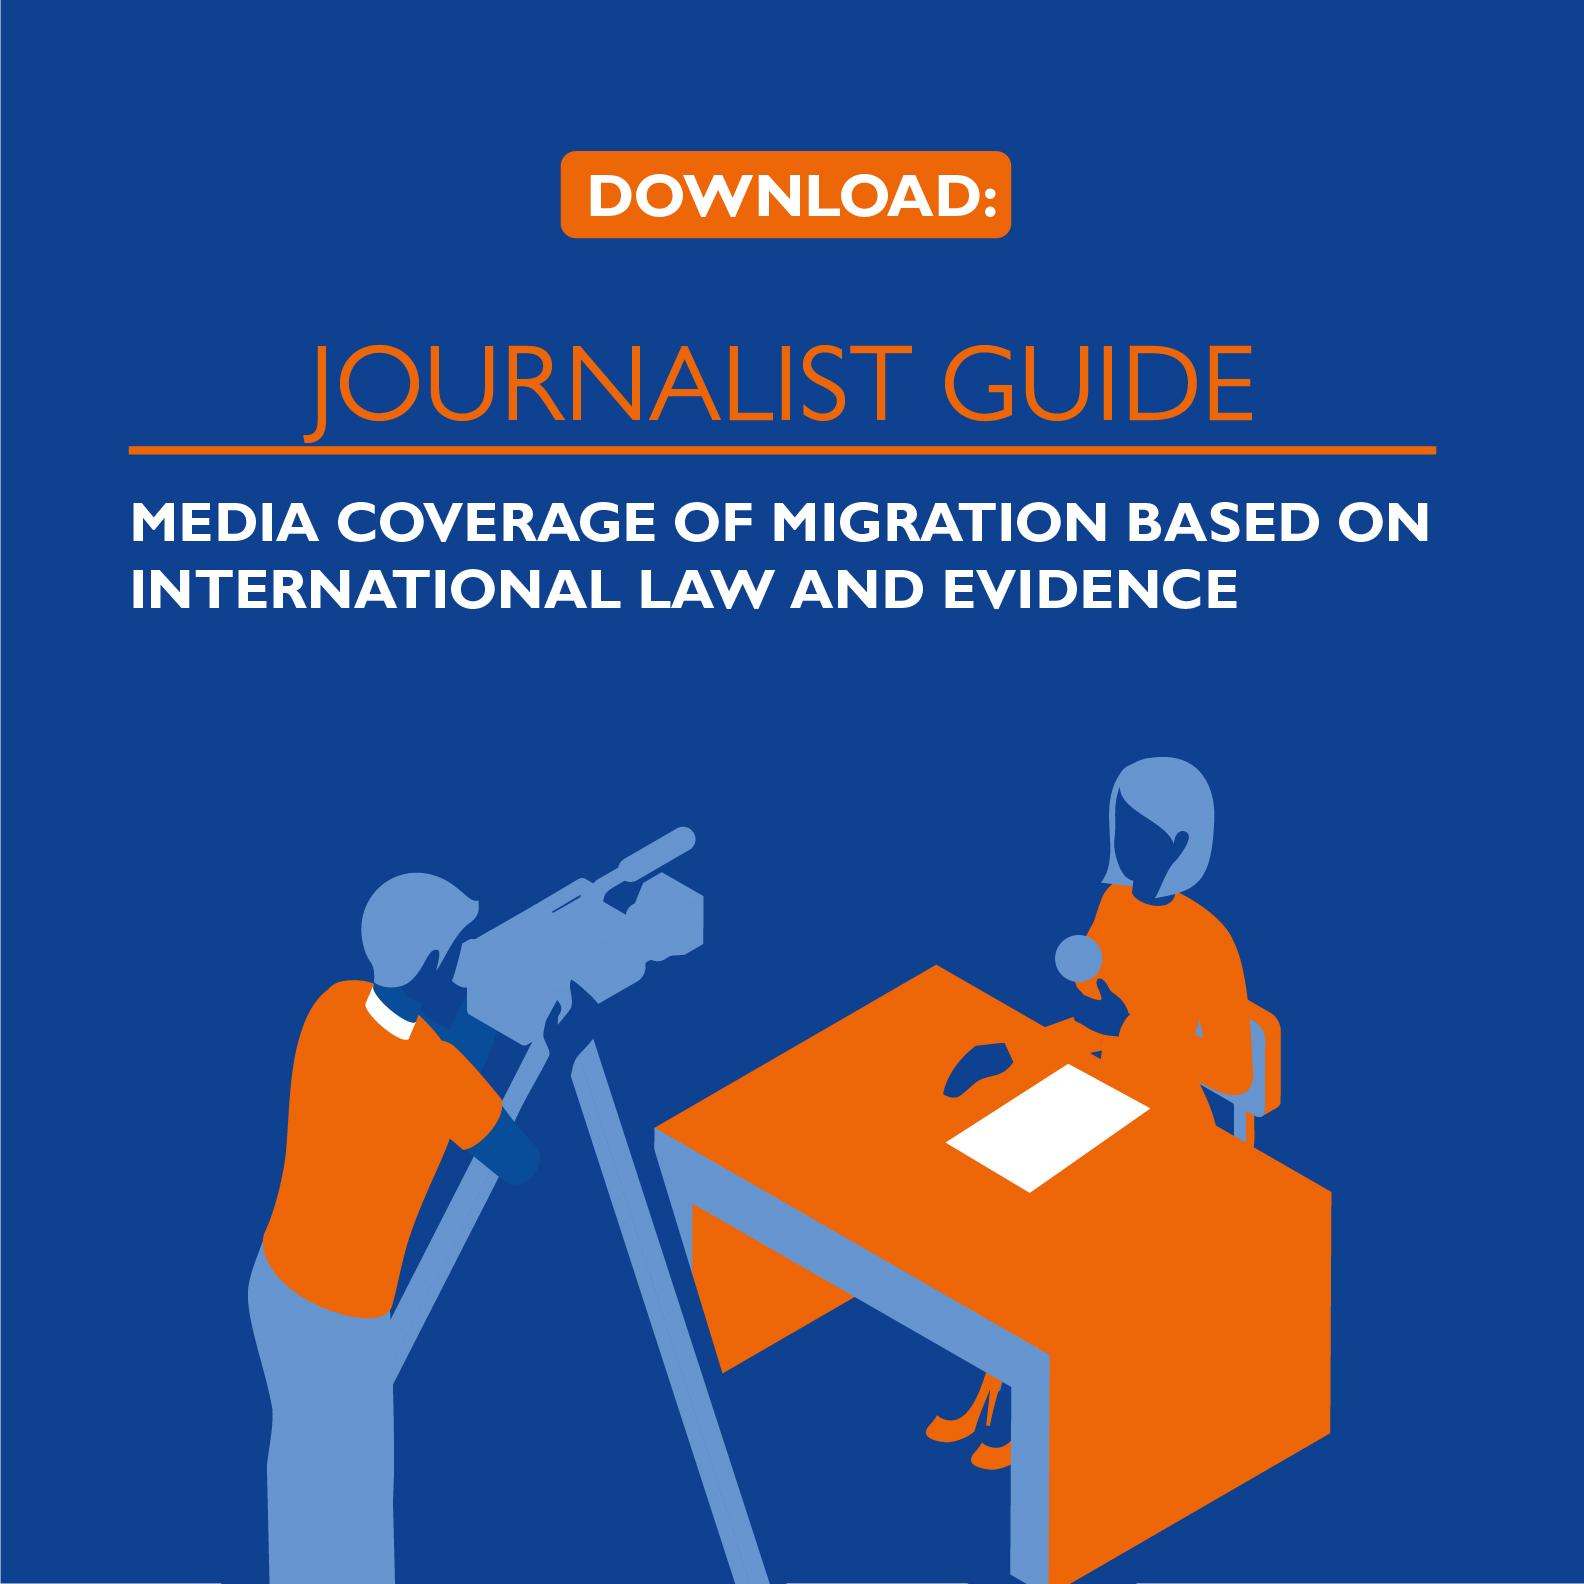 Download: Journalist guide to media coverage of migration based on international law and evidence